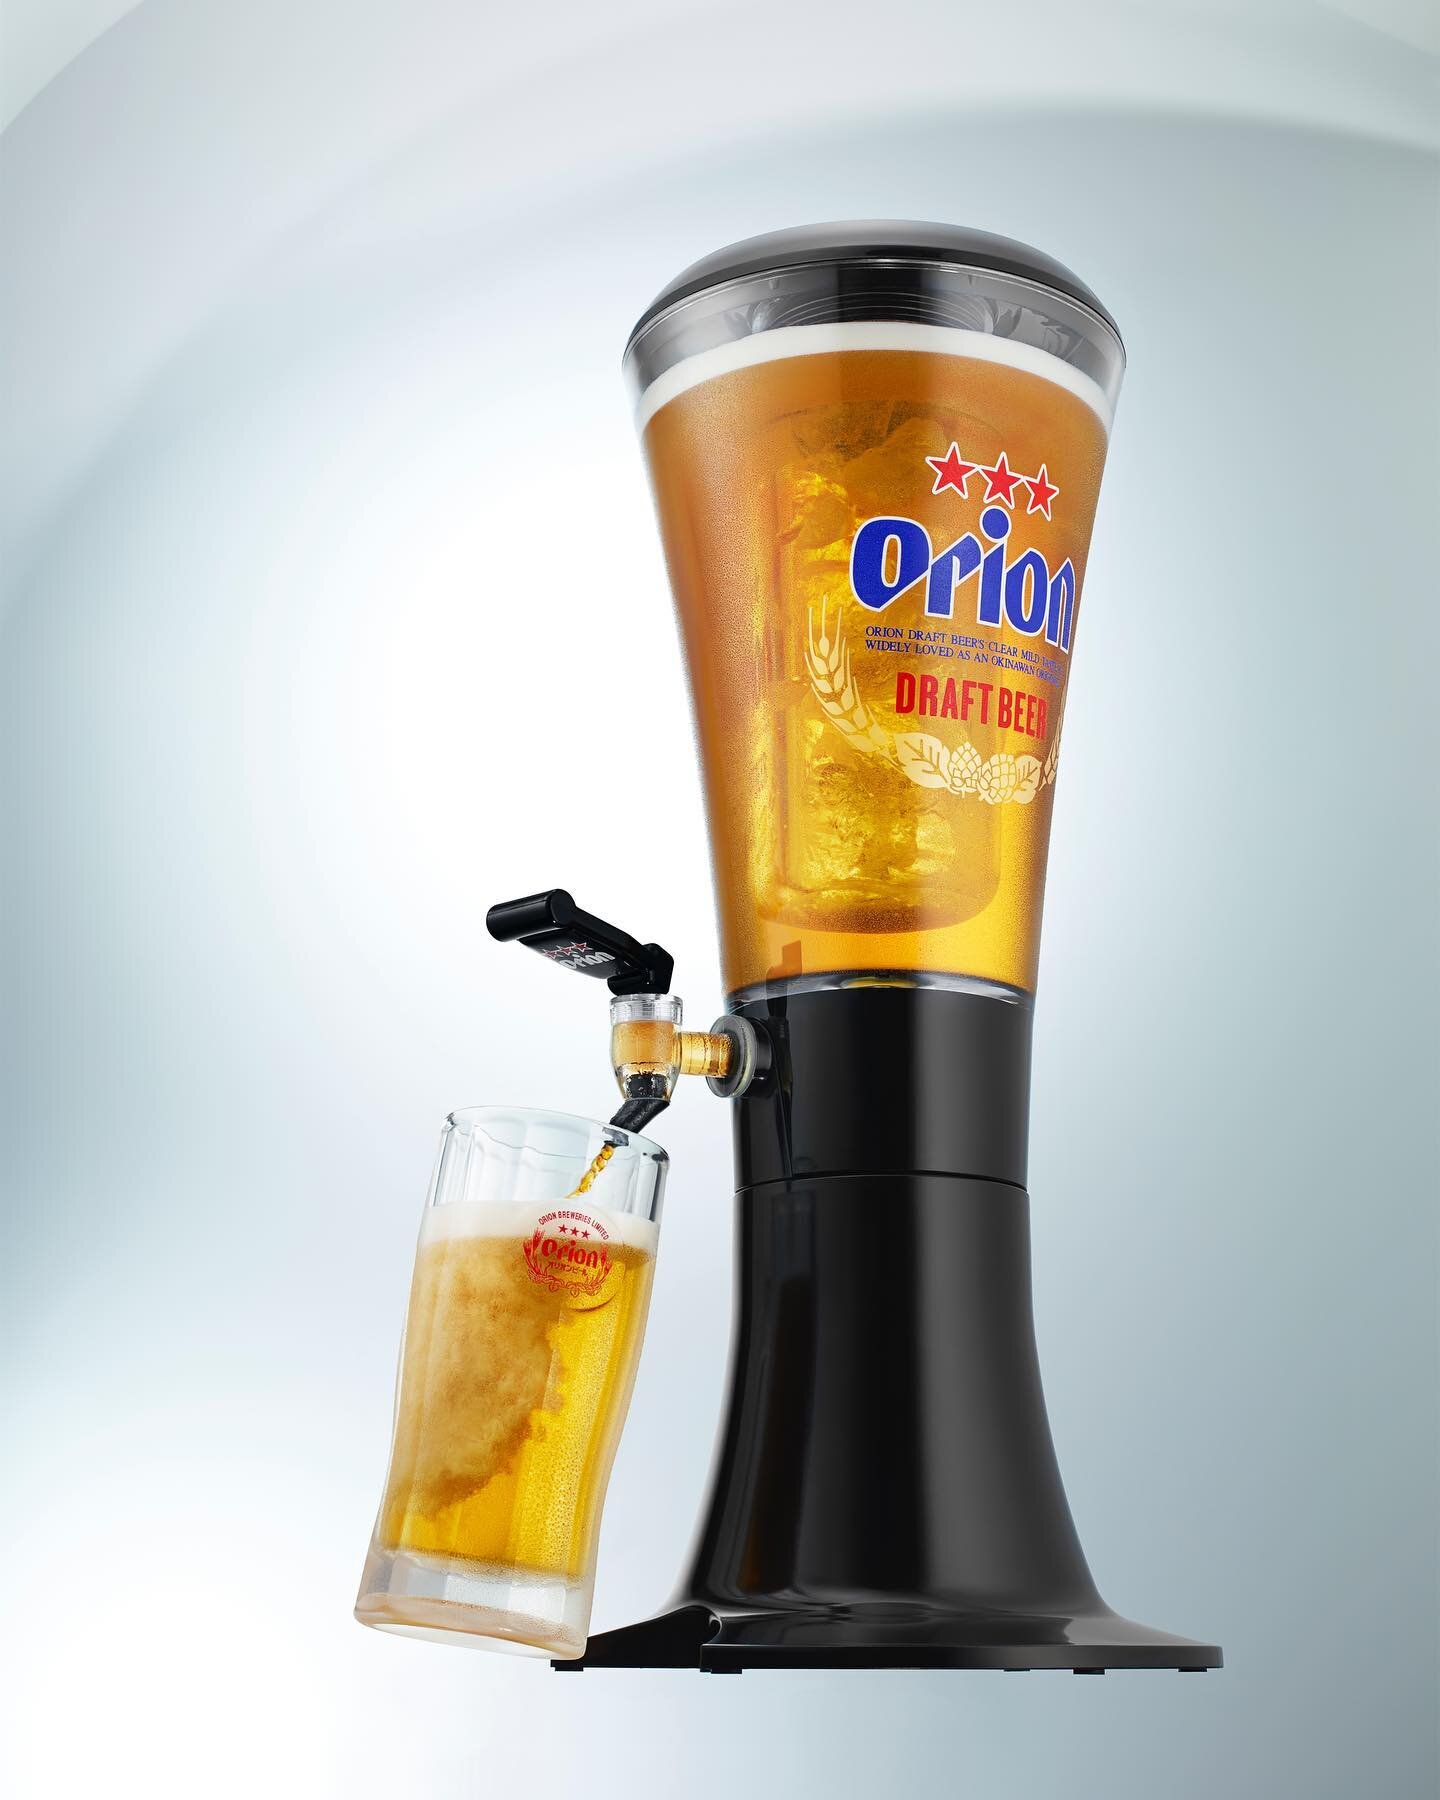 We do offer branded beer towers as well as our own towers for our customers to use.
This is a fun way of sharing freshly poured tap beer with your family or friends🍺🍻
#aebeerimports #aandebeerimports #asianbeer #europeanbeer #orionbeer #asahibeer #